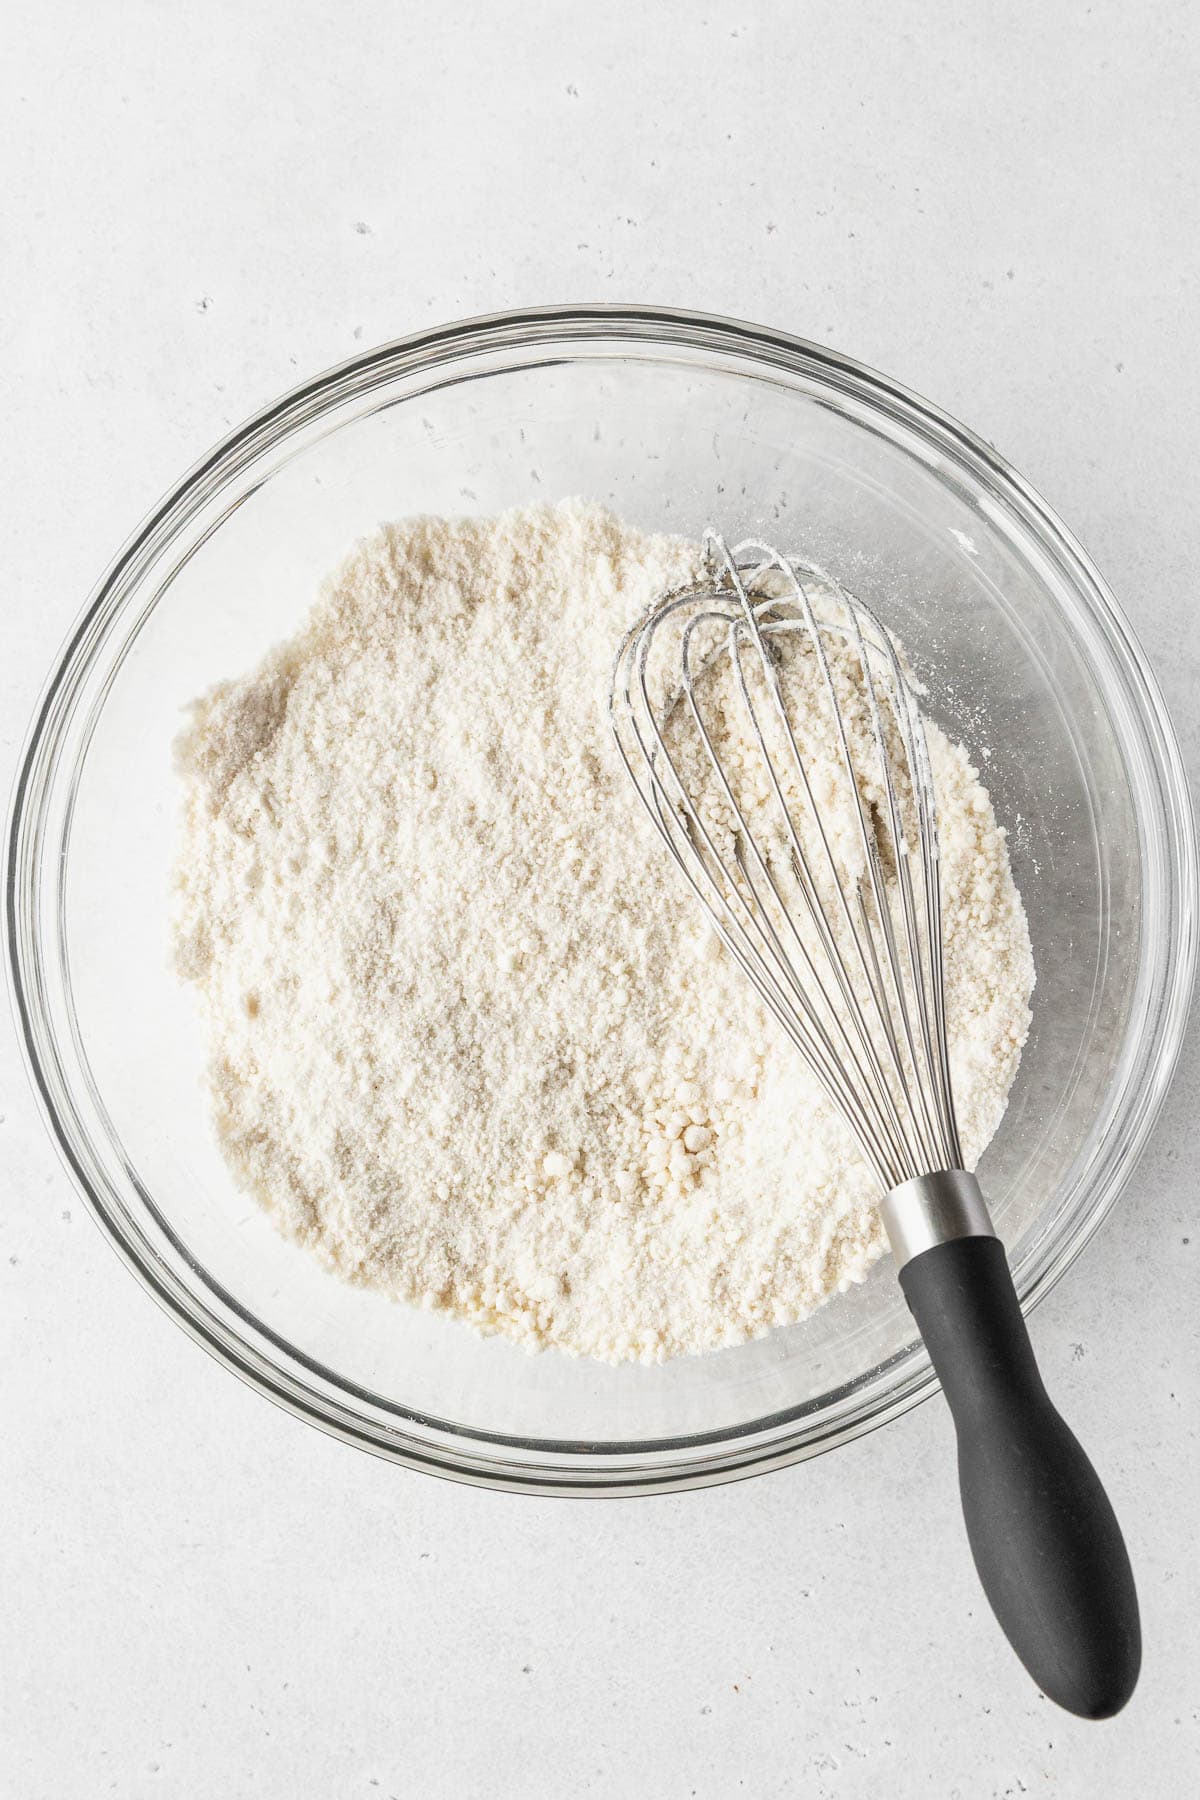 Dry ingredients whisked together in a clear glass mixing bowl.